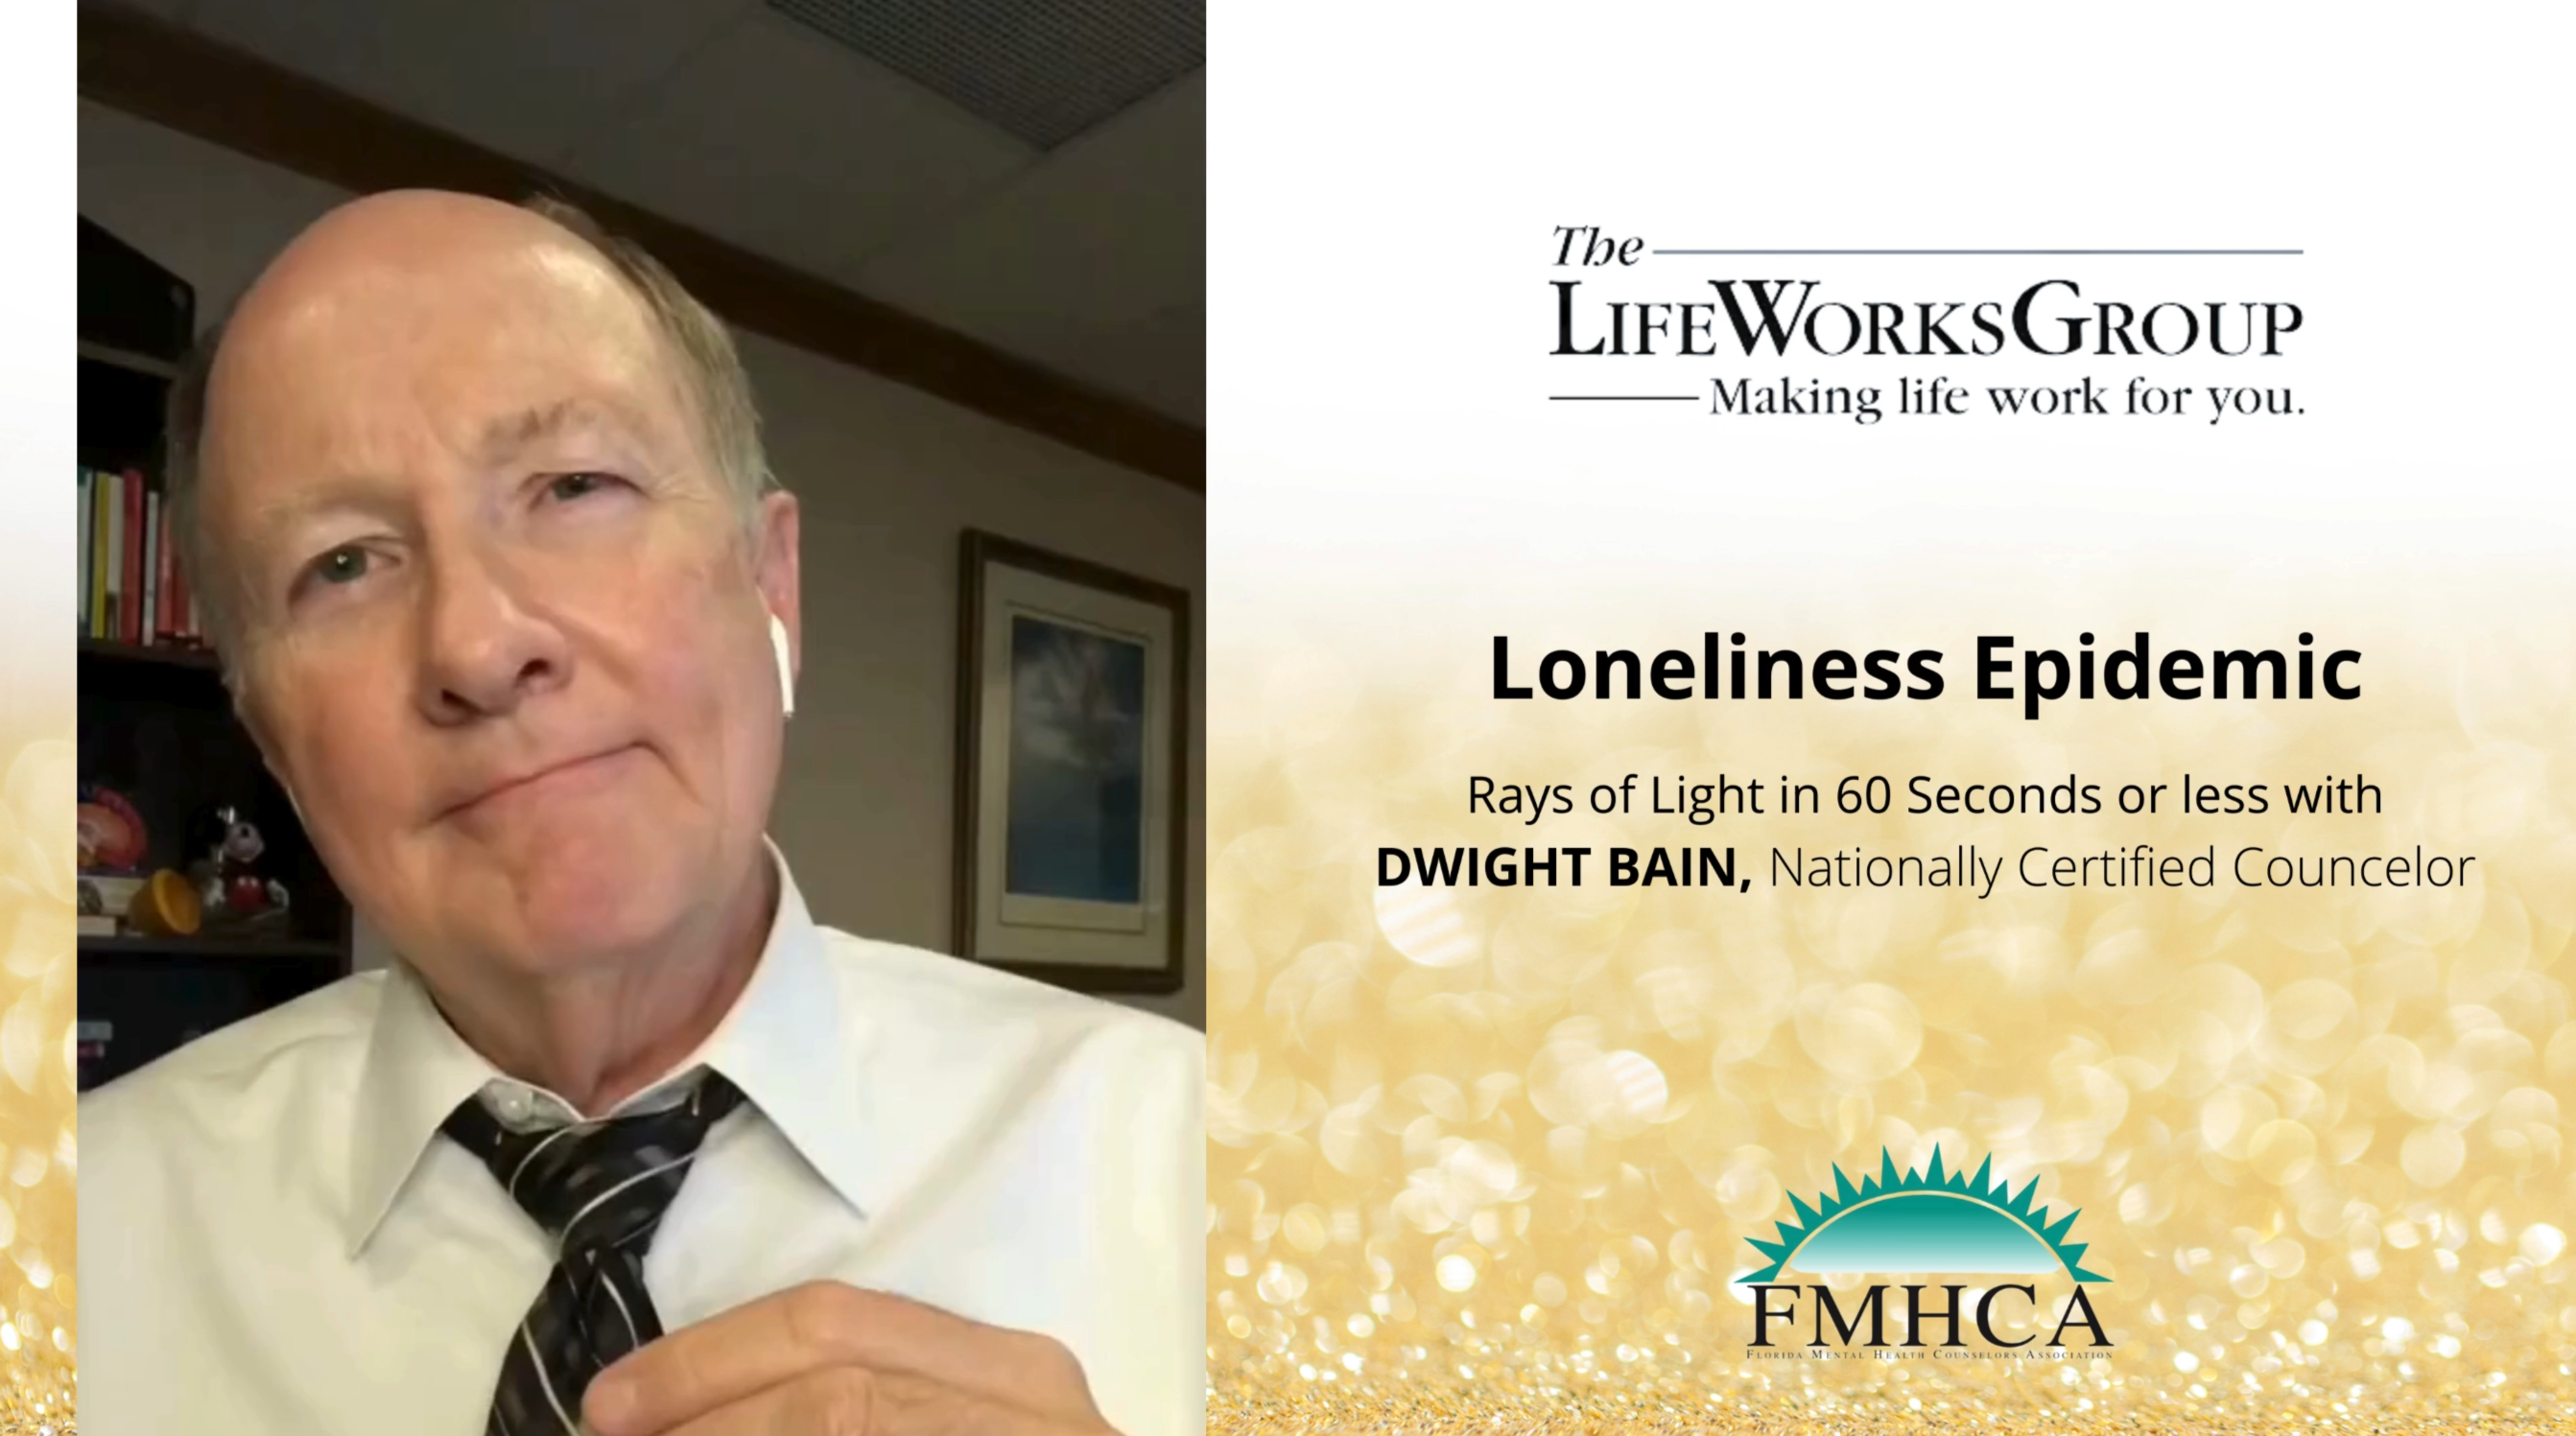 Ray of Light: Loneliness Epidemic